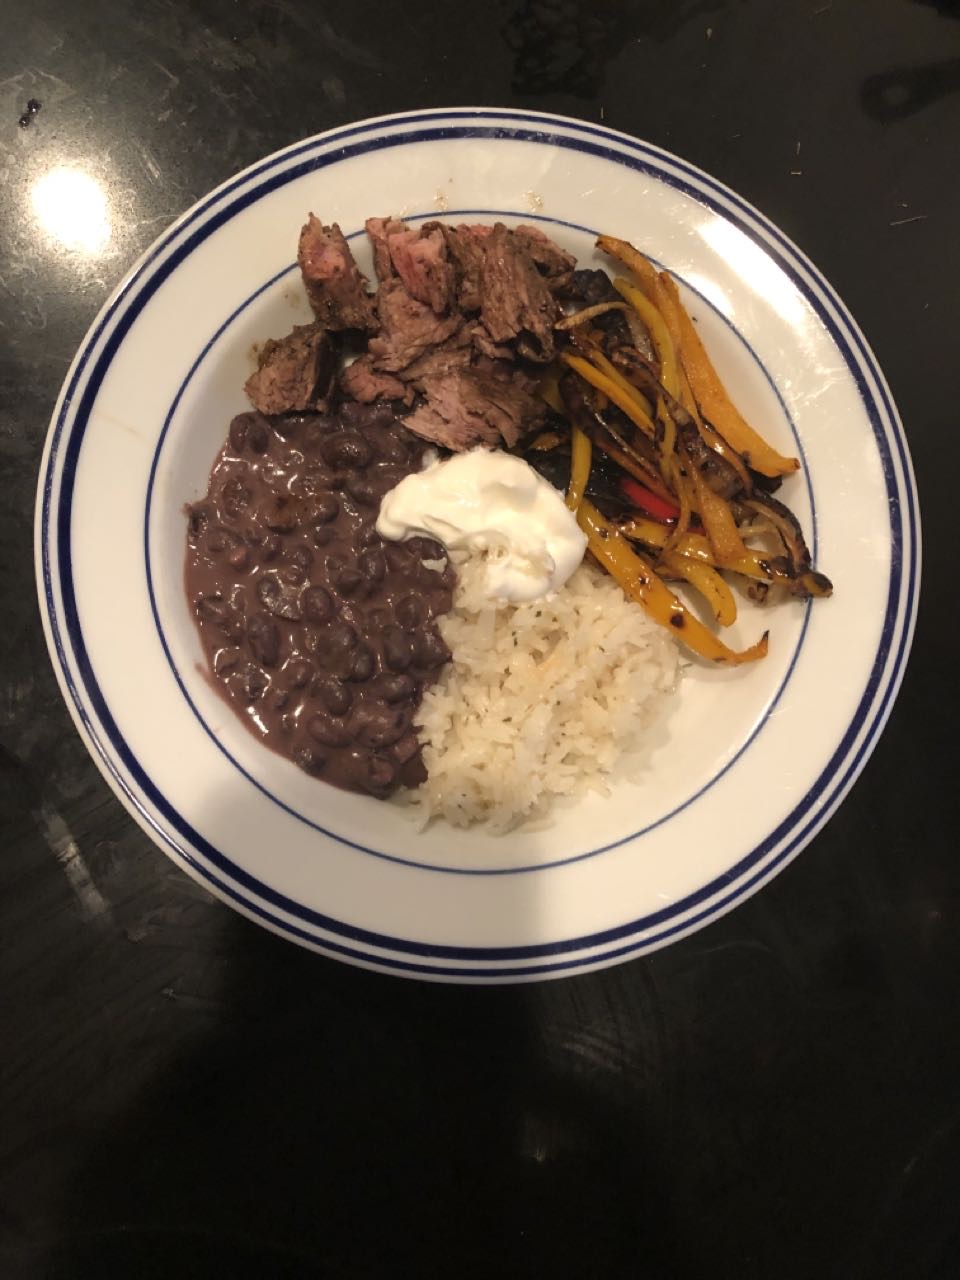 delicious-and-nutritious-Cutting-down-on-white-flour-Made-steak-bowls-lime--48ae6899-ba94-47b3-9dde-41c668409b2d-post-image